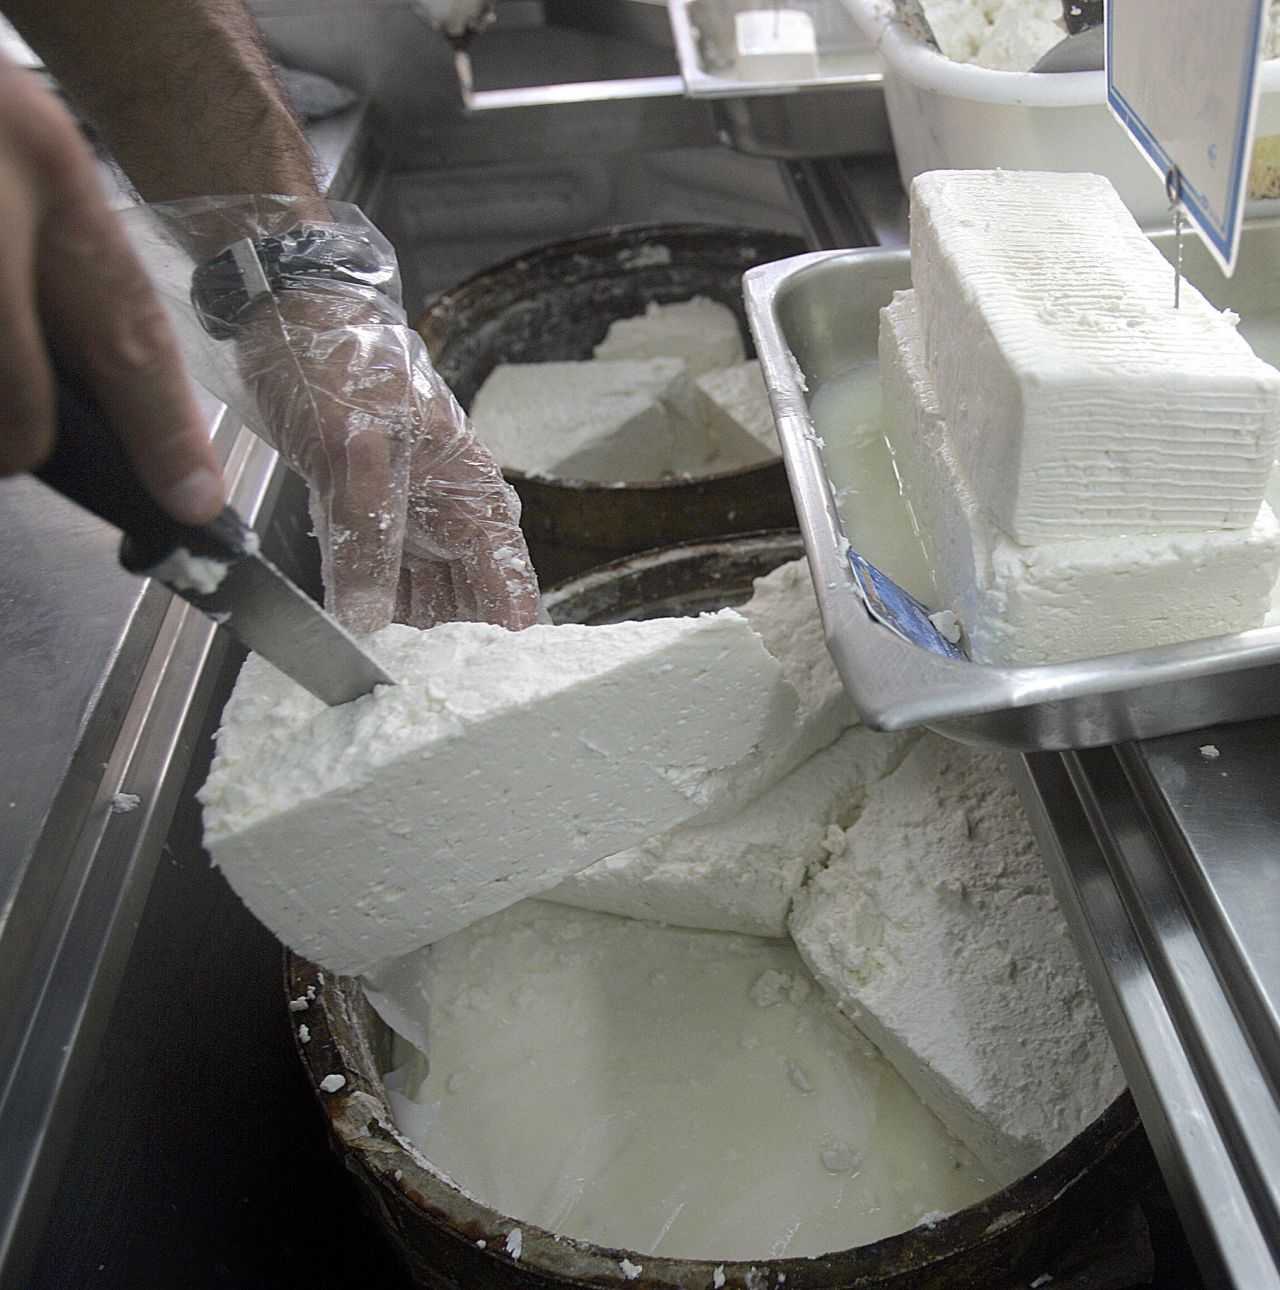 Greece is the purveyor of one of the world's most-loved cheeses: feta. In 2005, the EU ruled that Greece has exclusive rights to the cheese, meaning no other country can produce the salad favorite. 